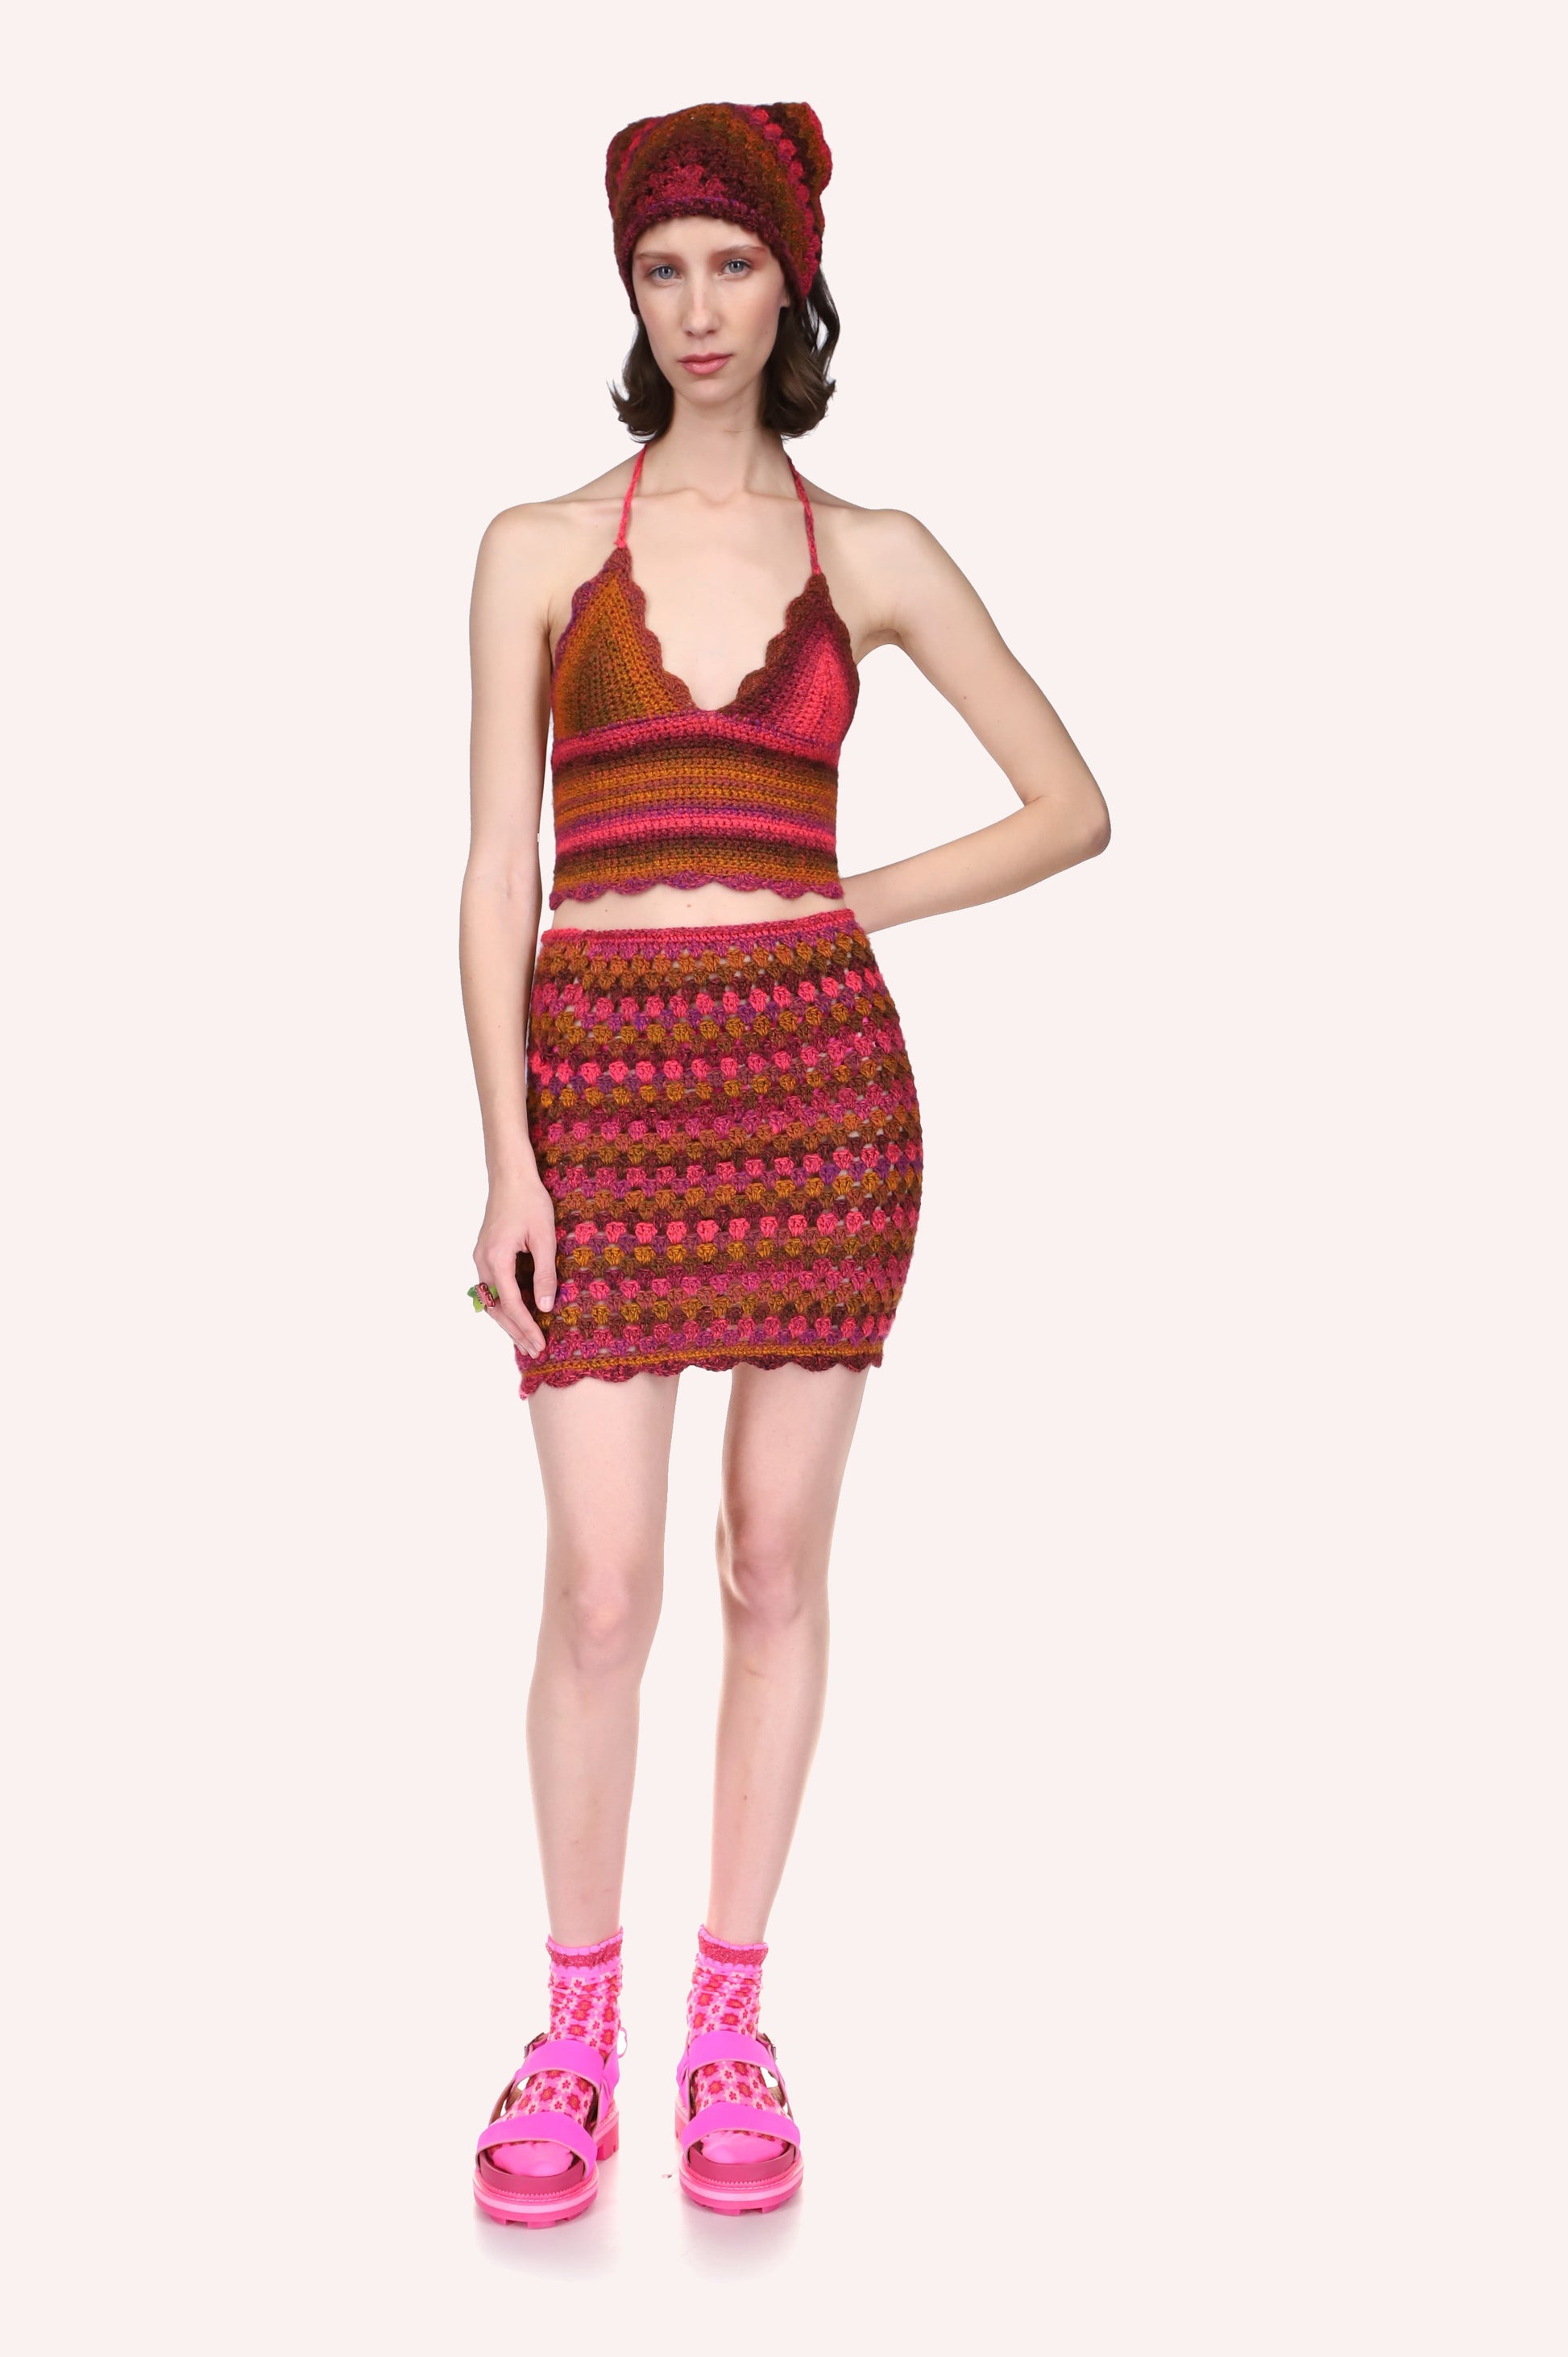 Ombre Hand Crochet Skirt by Konry K Raspberry, can be worn with any raspberry Anna Sui attire